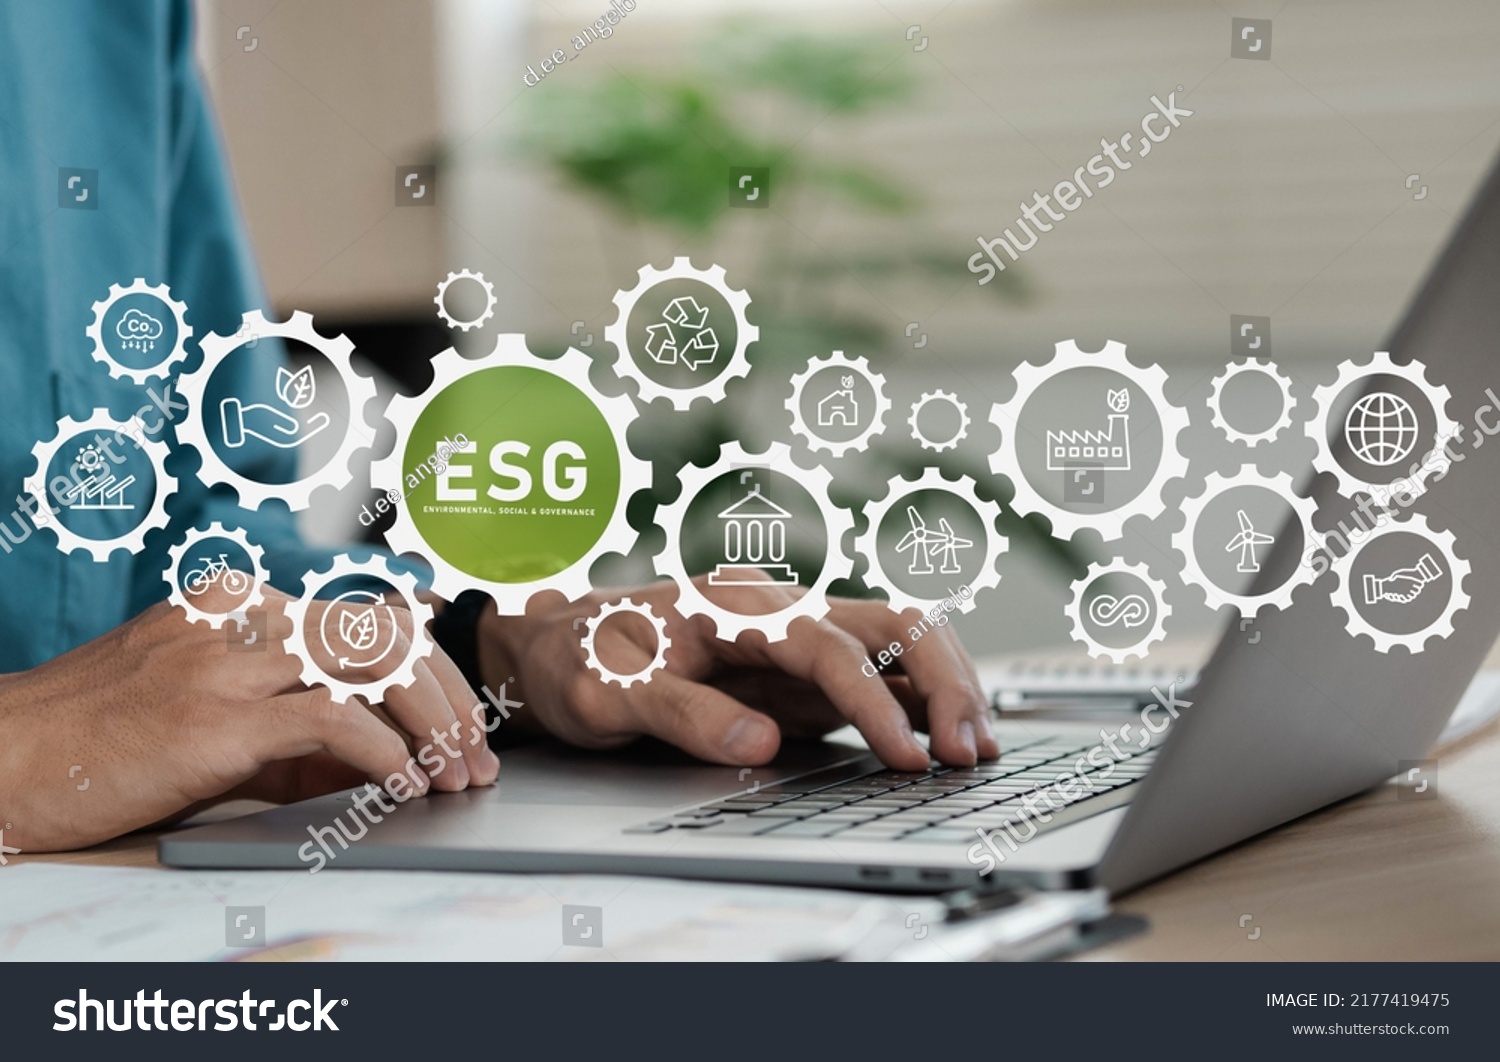 Businessman using computers for environment, society and governance. ESG icon concept in sustainable and ethical business on gimmicks, networked on background. #2177419475